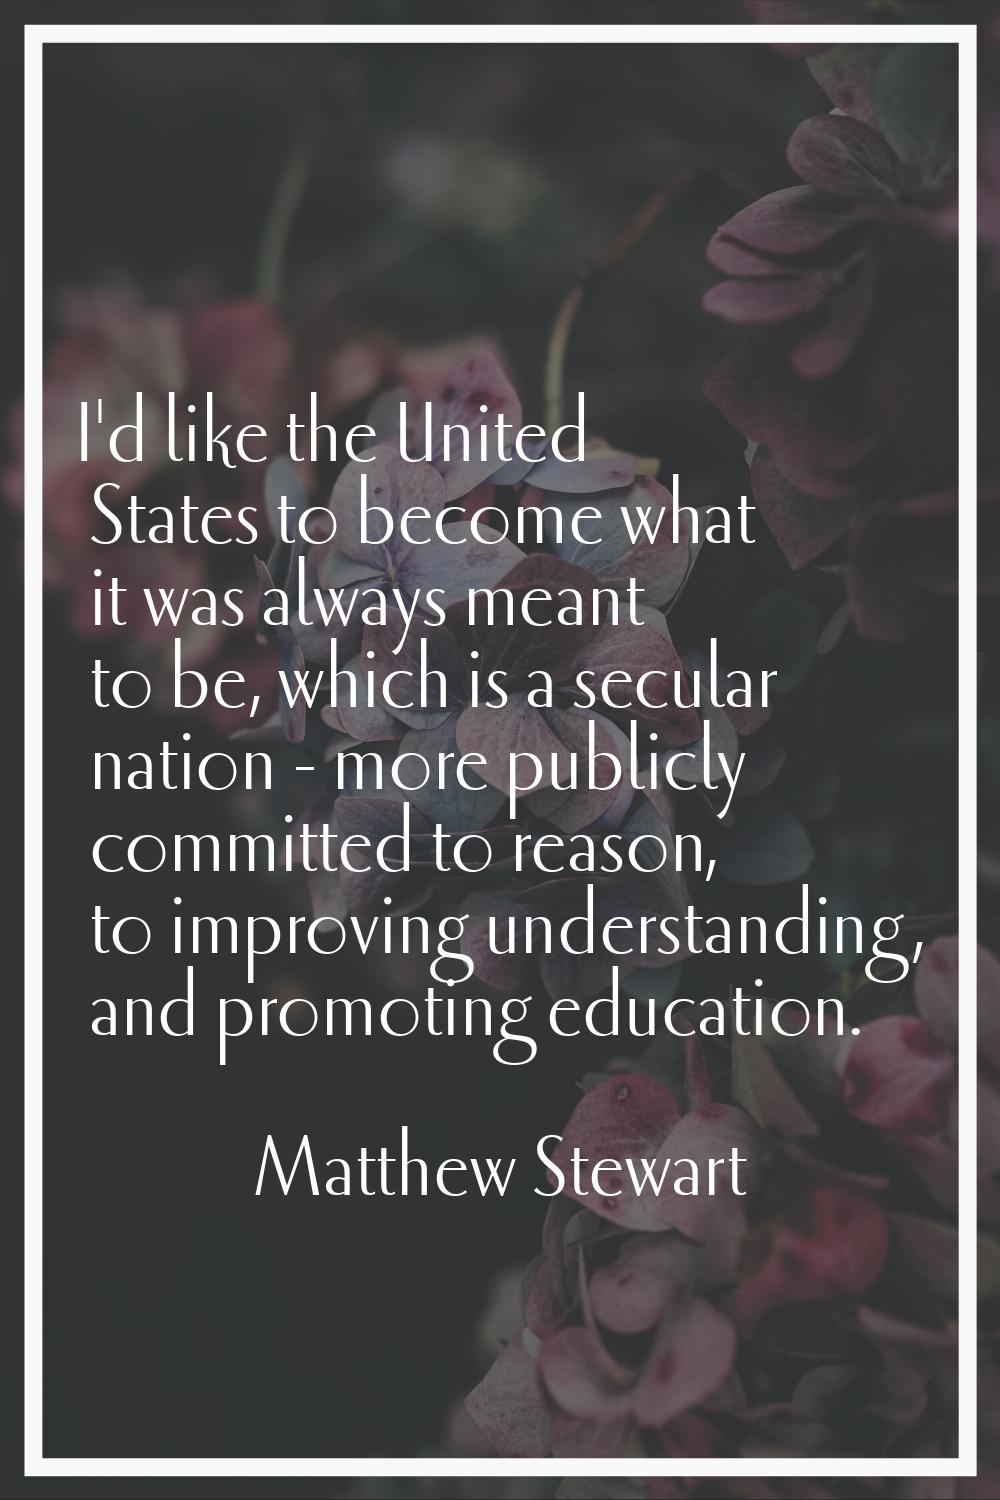 I'd like the United States to become what it was always meant to be, which is a secular nation - mo